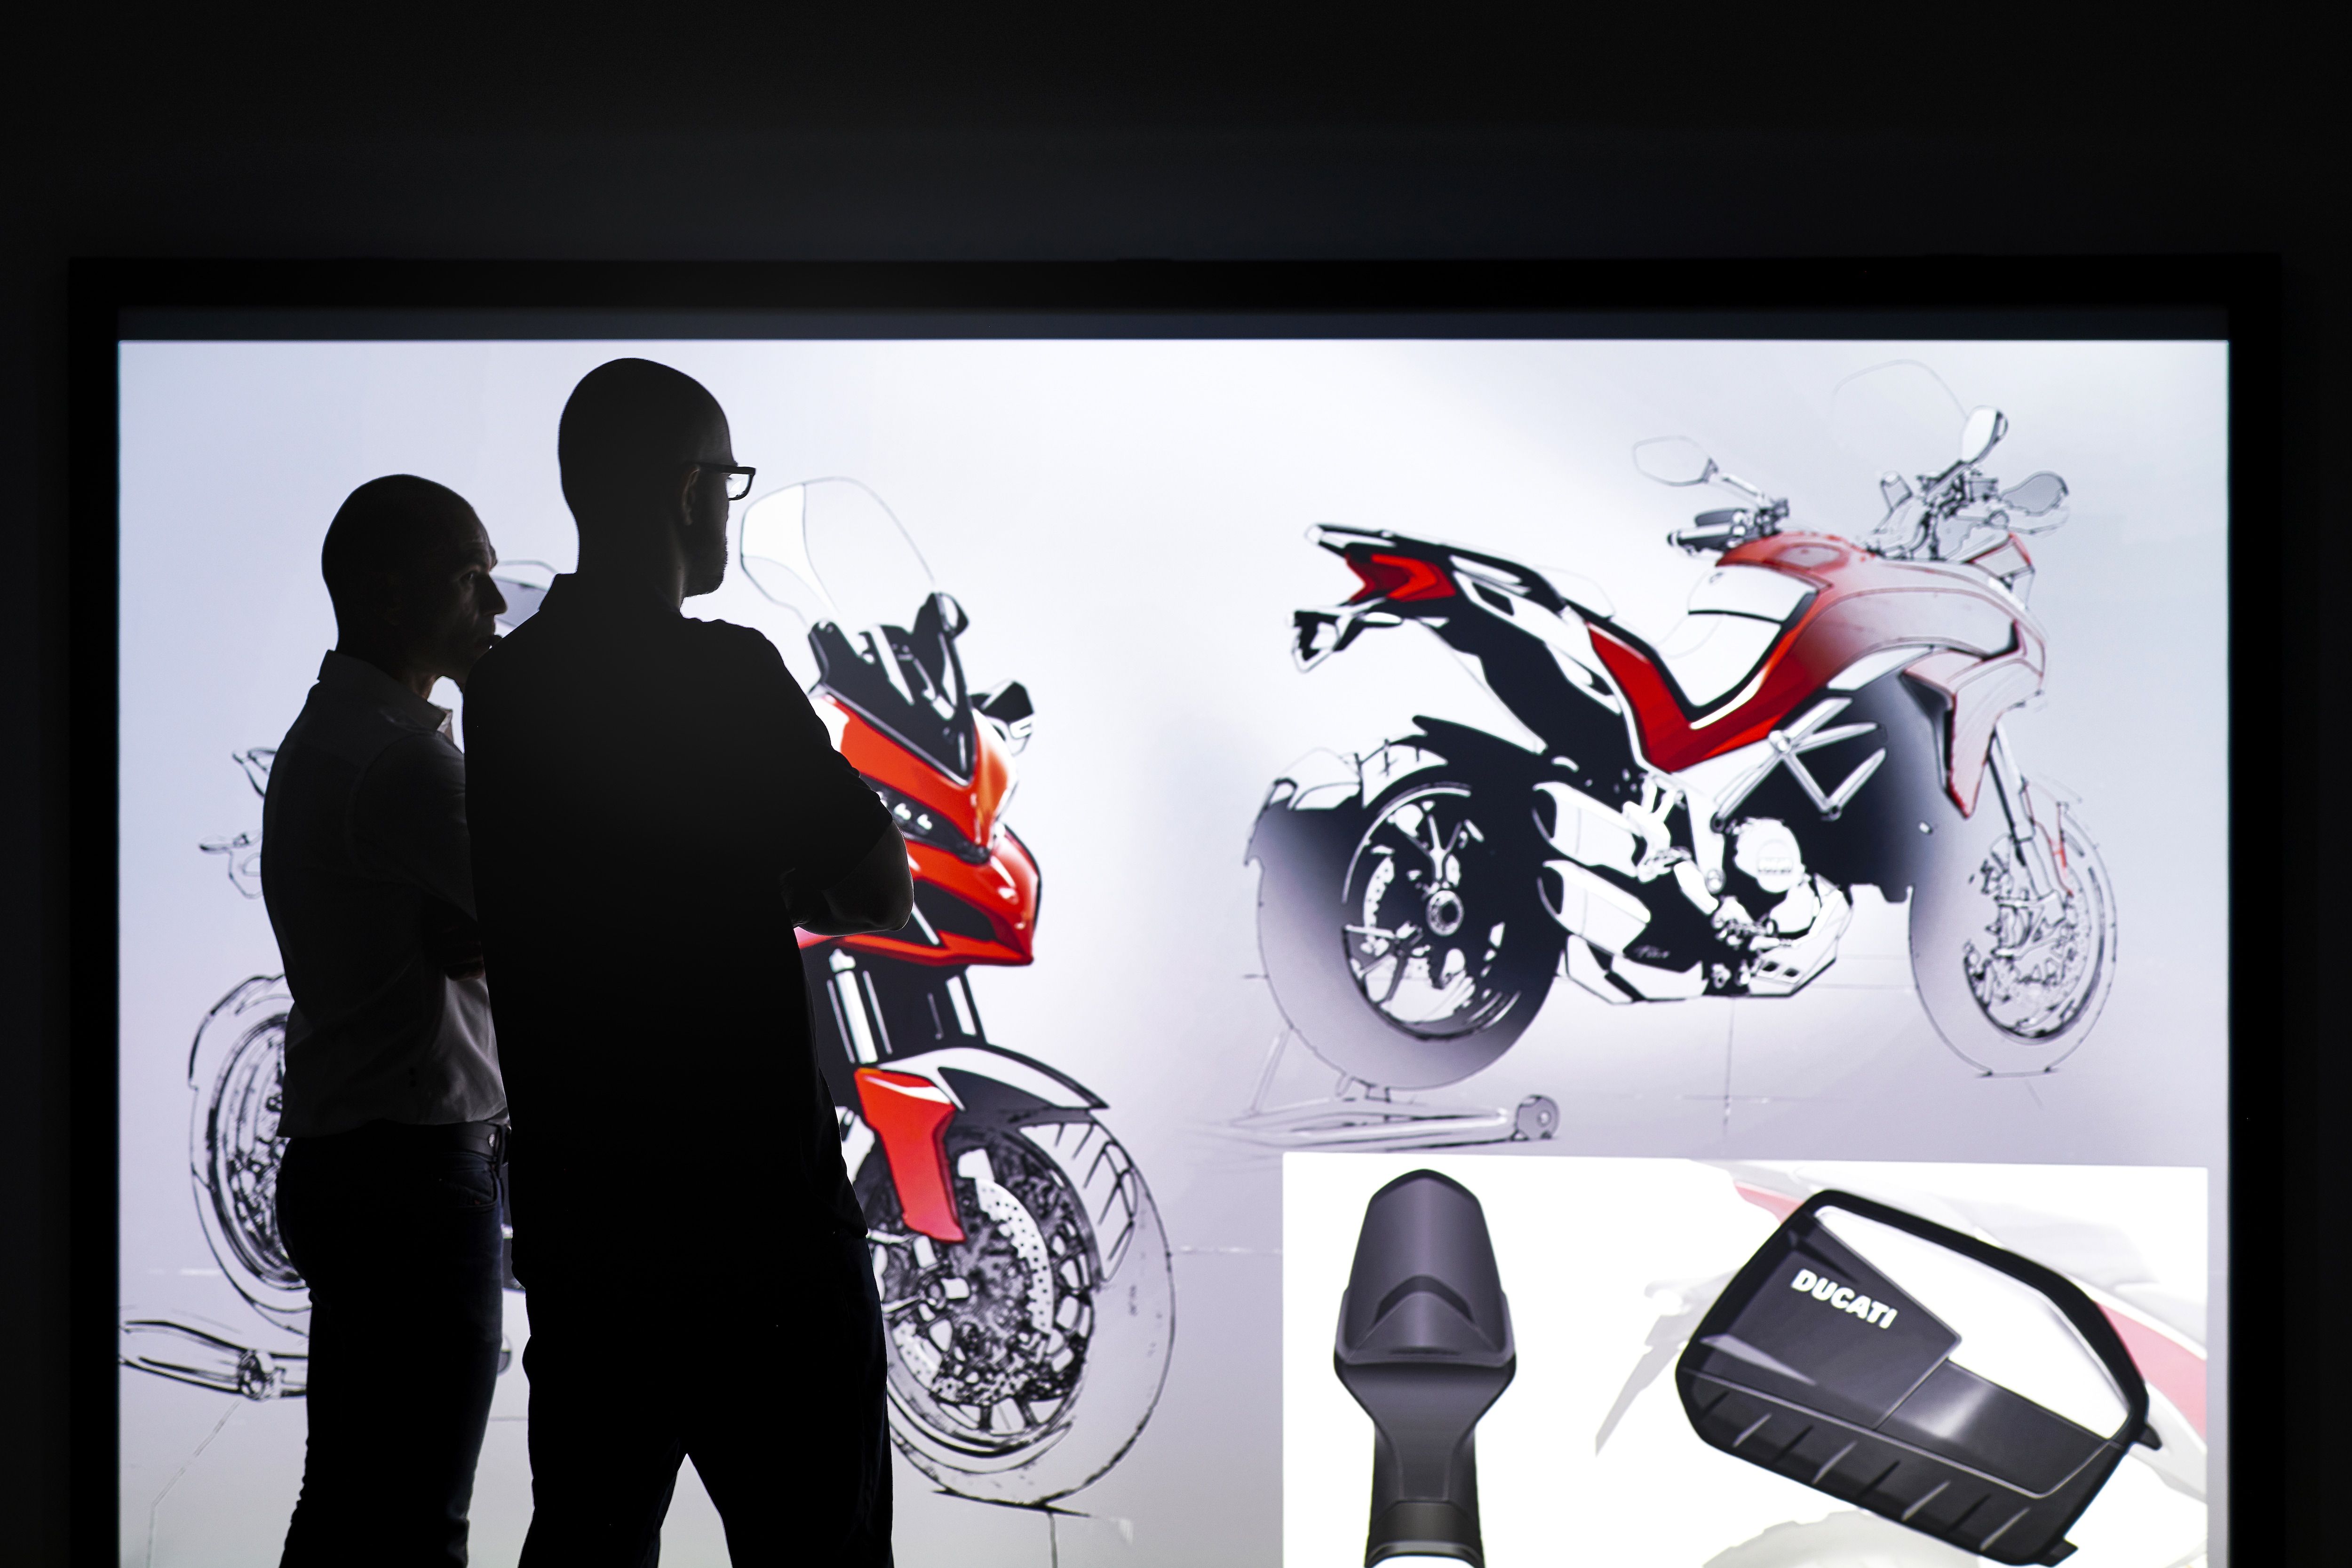 The accessory production process is a proven one. Ducati photo